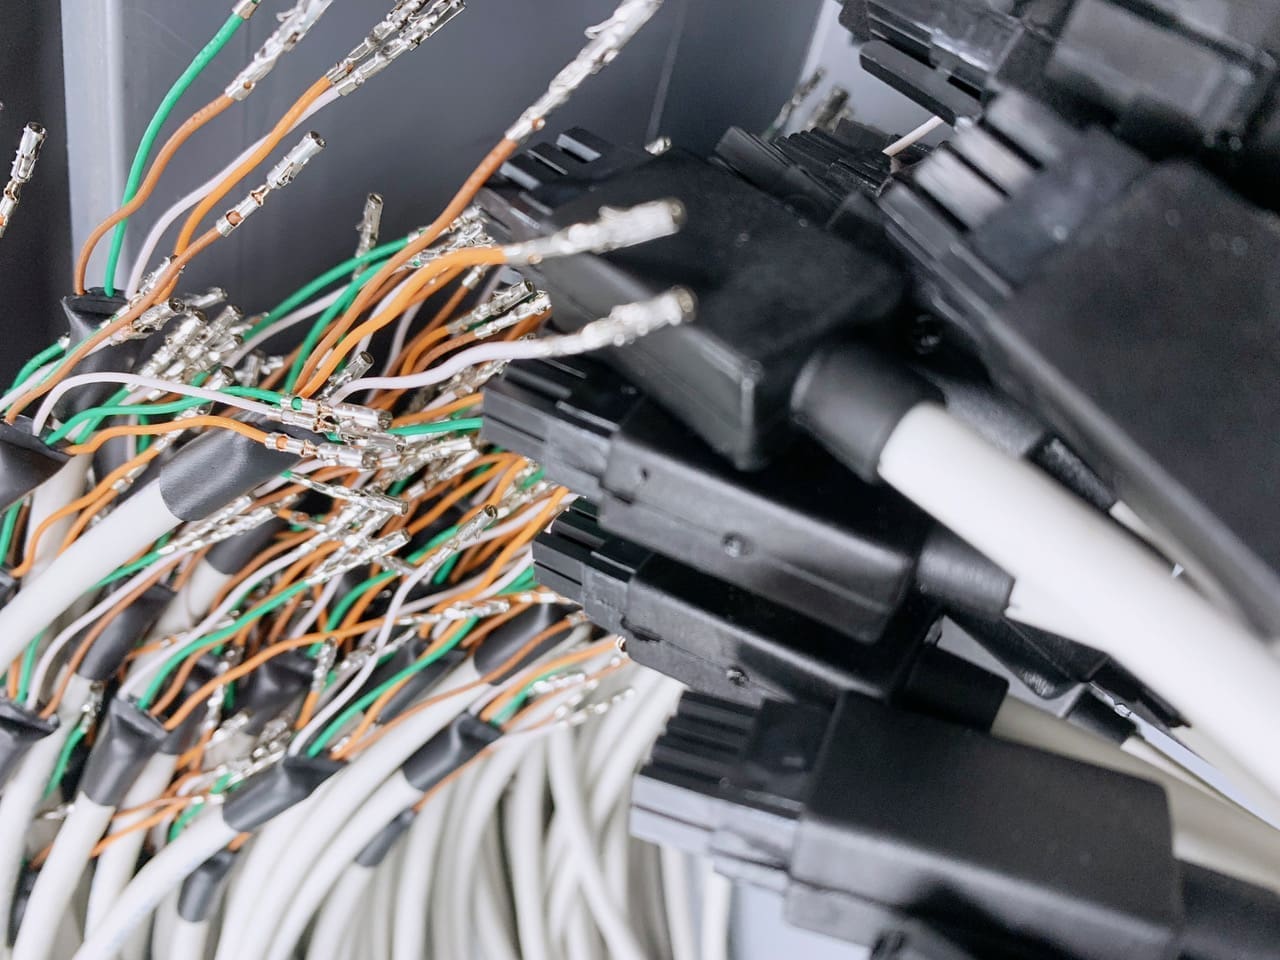 The image shows a close-up of a cluster of cables and connectors. We see a mix of shielded and unshielded wires, with various colours like orange, green, and white. Some of the wires are stripped at the end, exposing the metal conductors. These are typically used for making electrical connections in a system. A number of black connectors are visible, suggesting that these cables are part of a larger assembly or network of connections, possibly within a data center, telecommunications system, or complex electronic equipment. The focus is slightly blurred, adding a sense of depth and complexity to the array of connections.